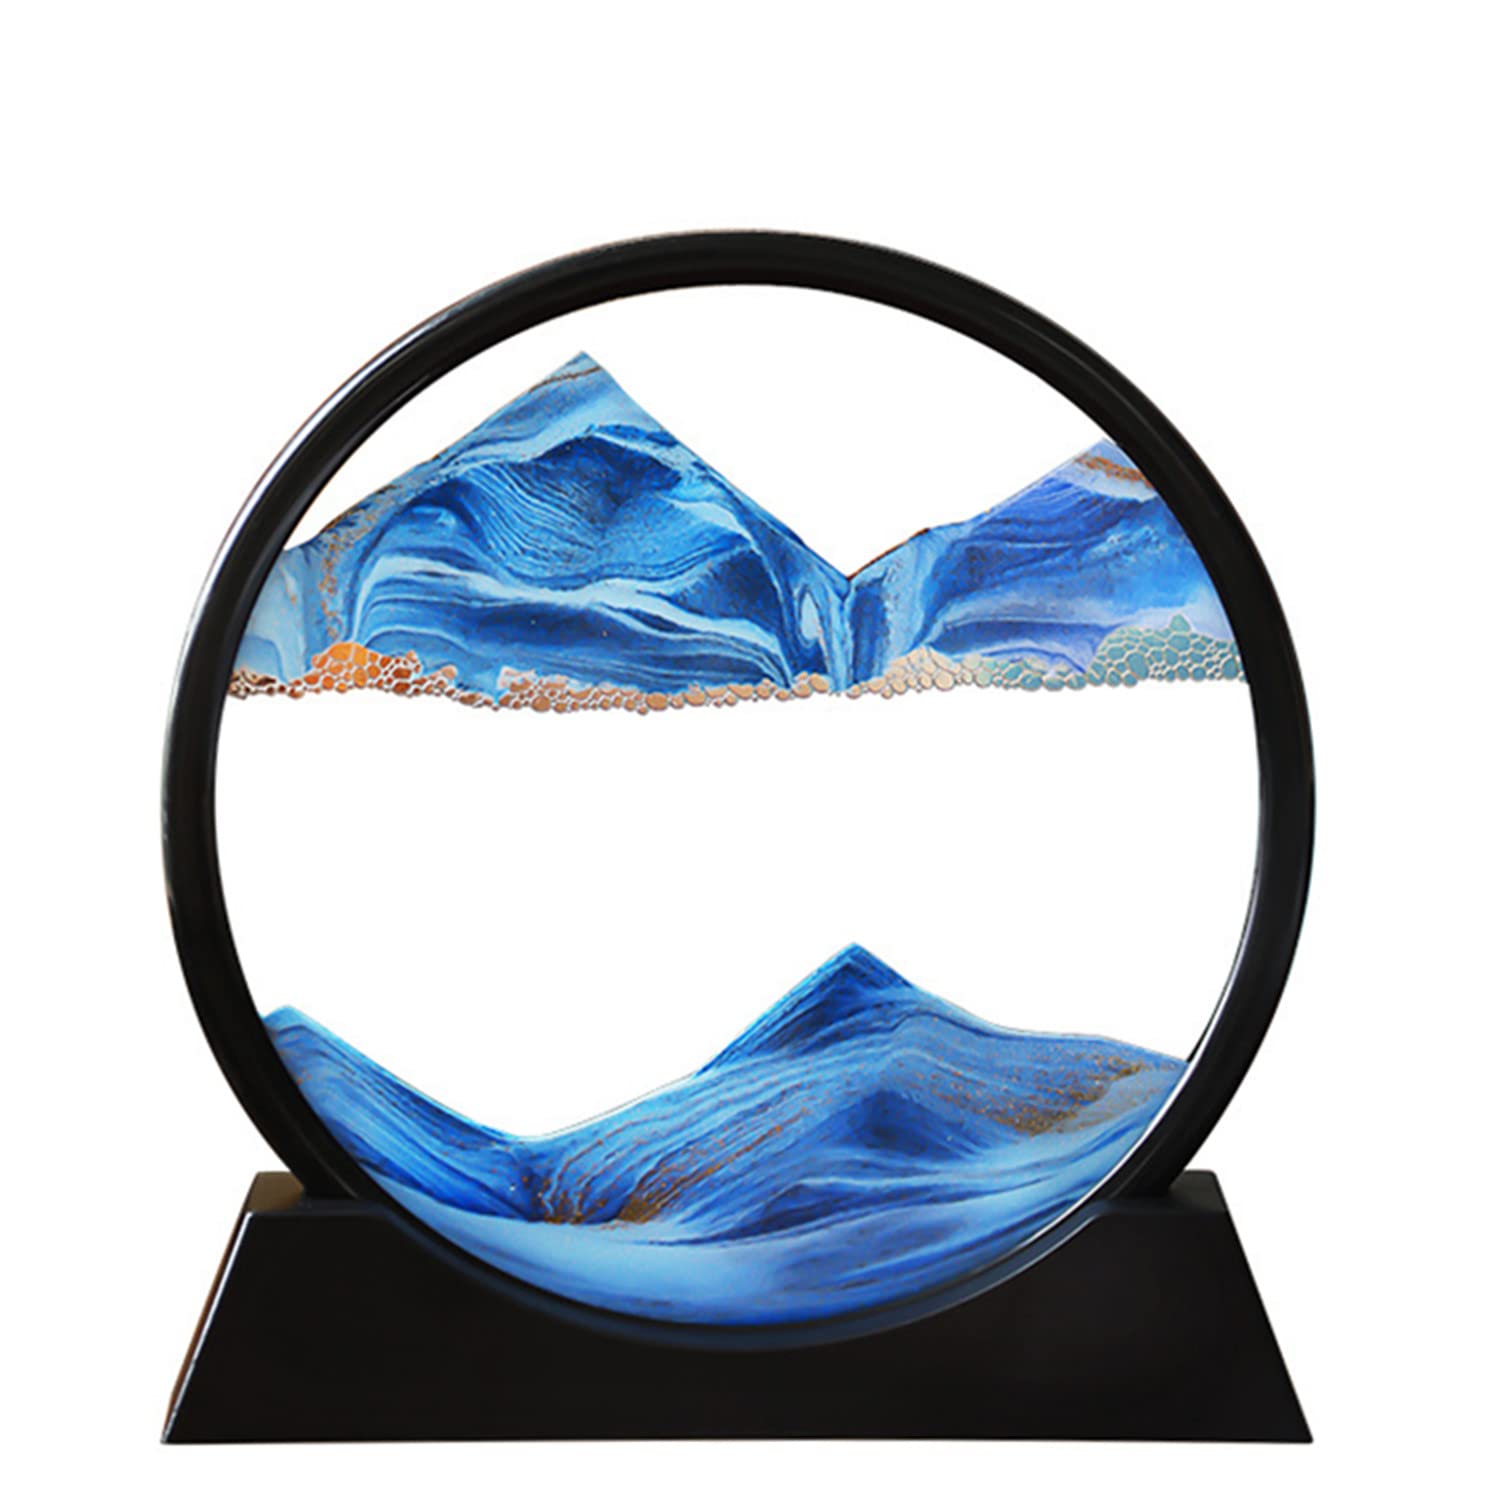 Mua Arthink Moving Sand Art Picture in Motion Round Glass 3D Deep ...